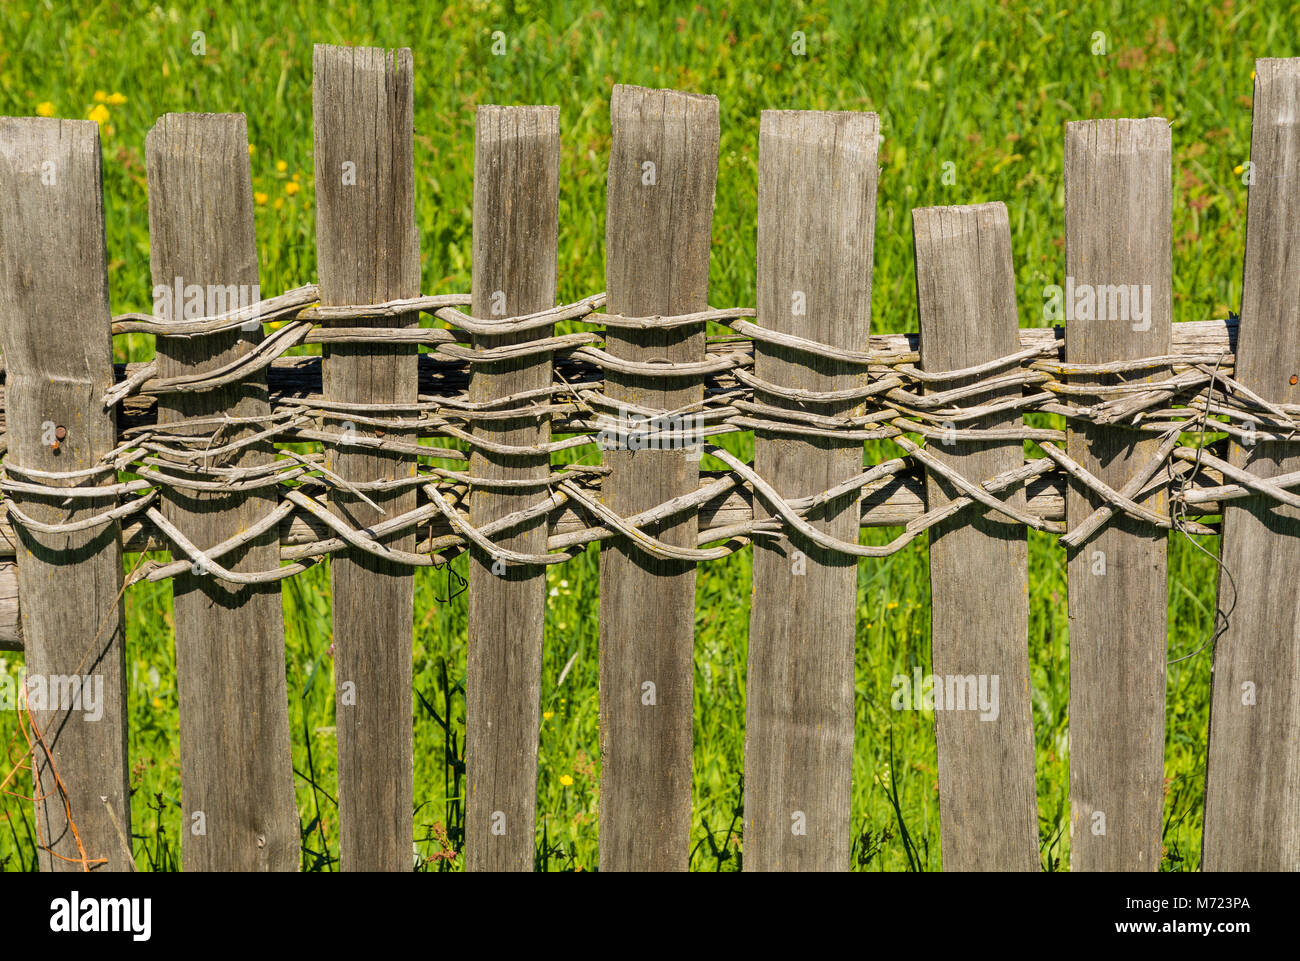 Wooden fence in south tyrol, Italy. typical wooden fence system of the alpine areas of Trentino Alto Adige Stock Photo